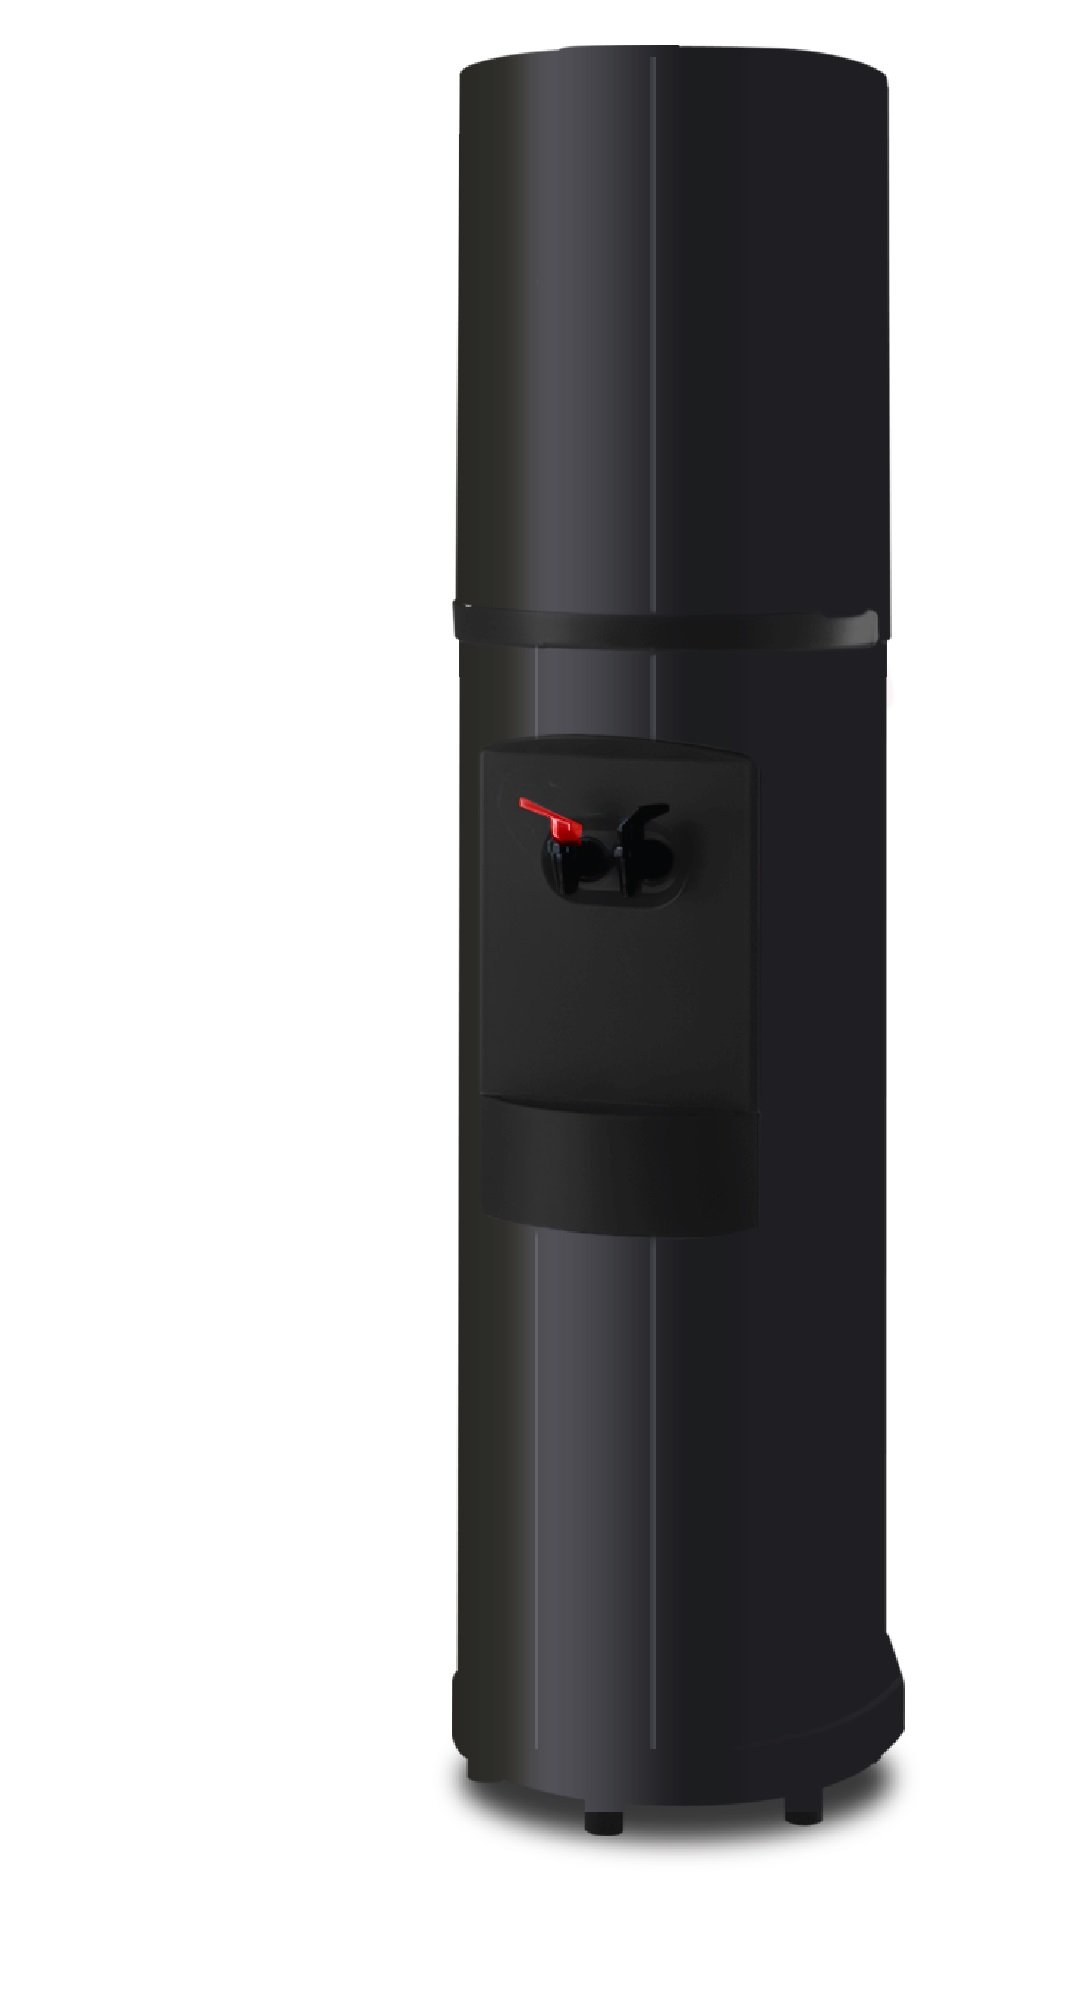 Fahrenheit Water Cooler -Black with Black Trim Kit - Hot/Cold